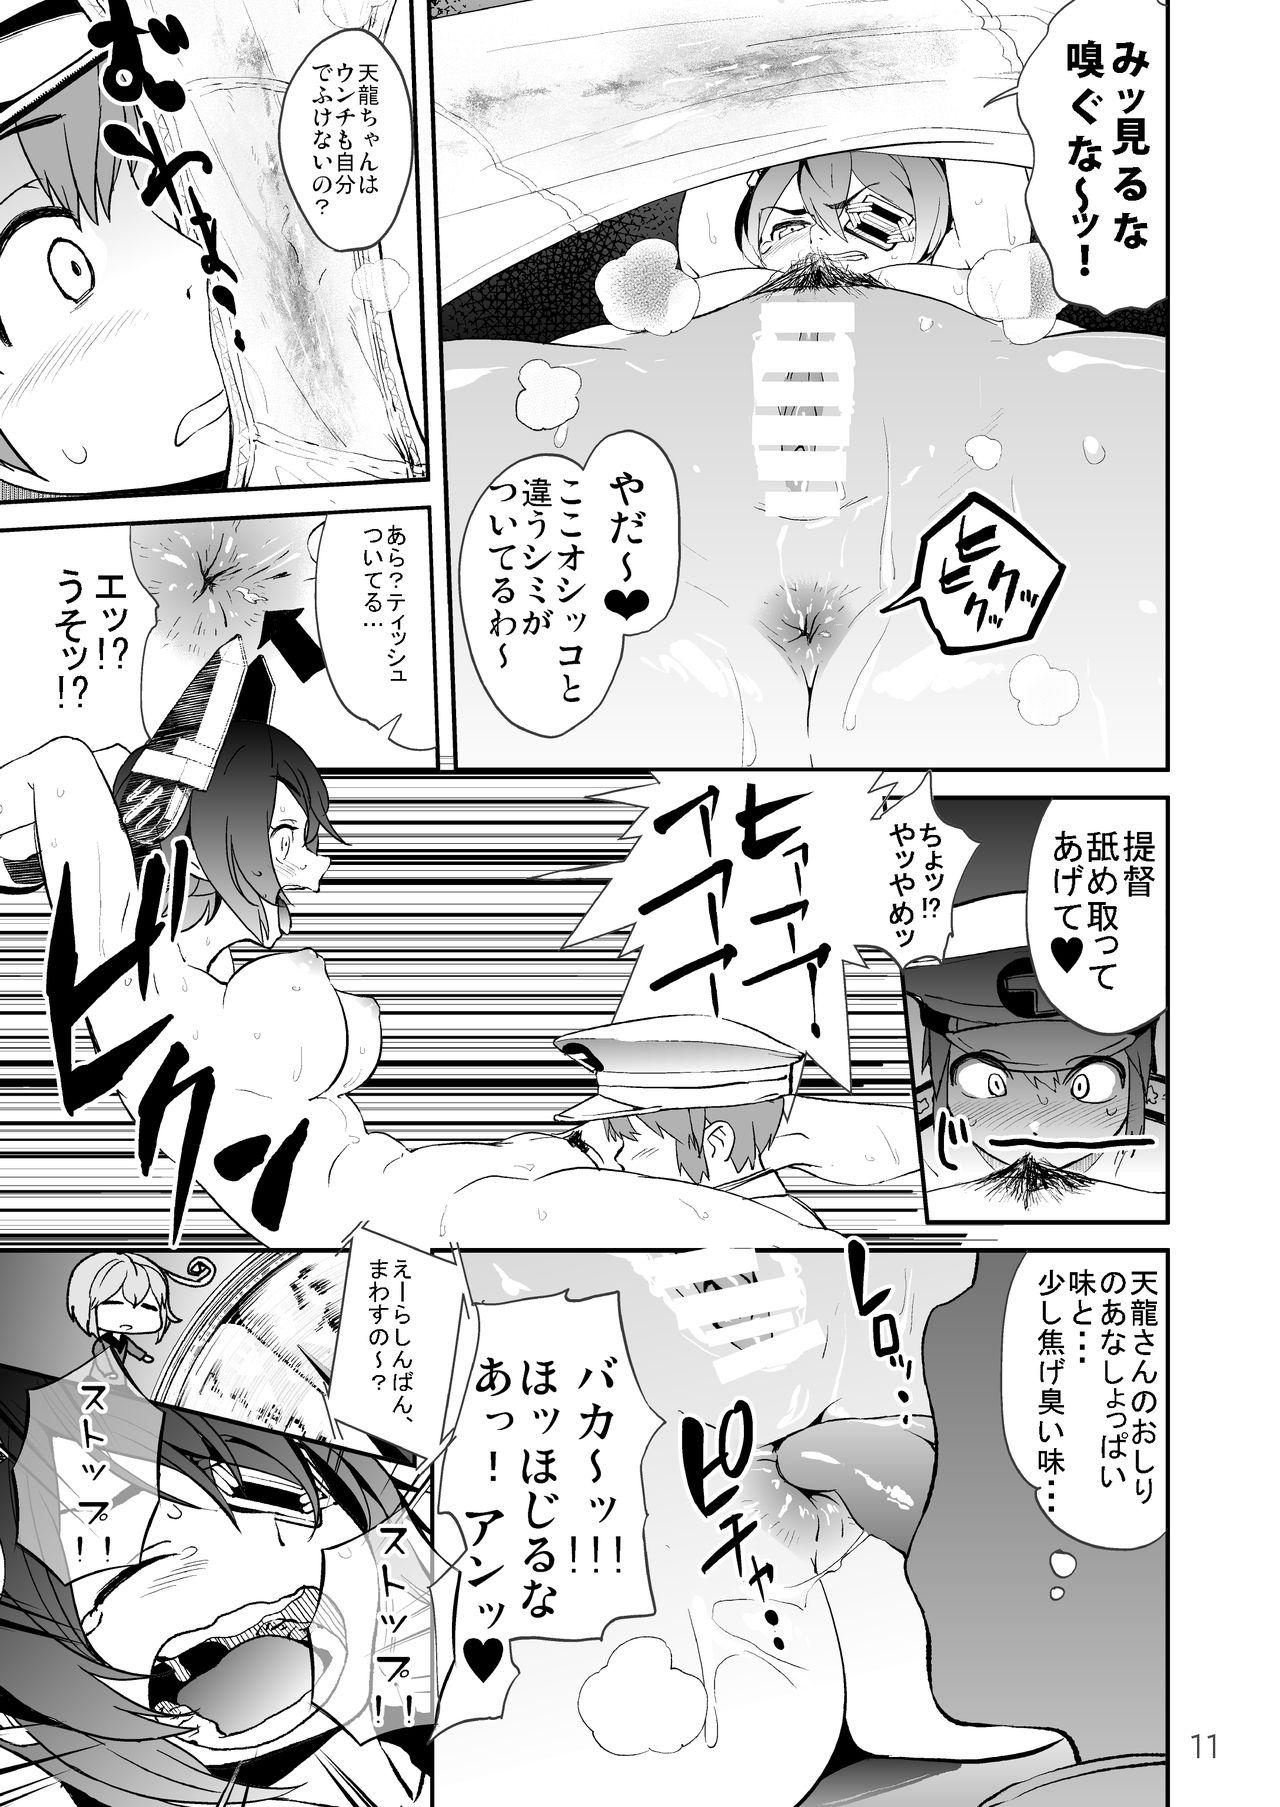 Chile Operation TTT - Kantai collection Defloration - Page 11